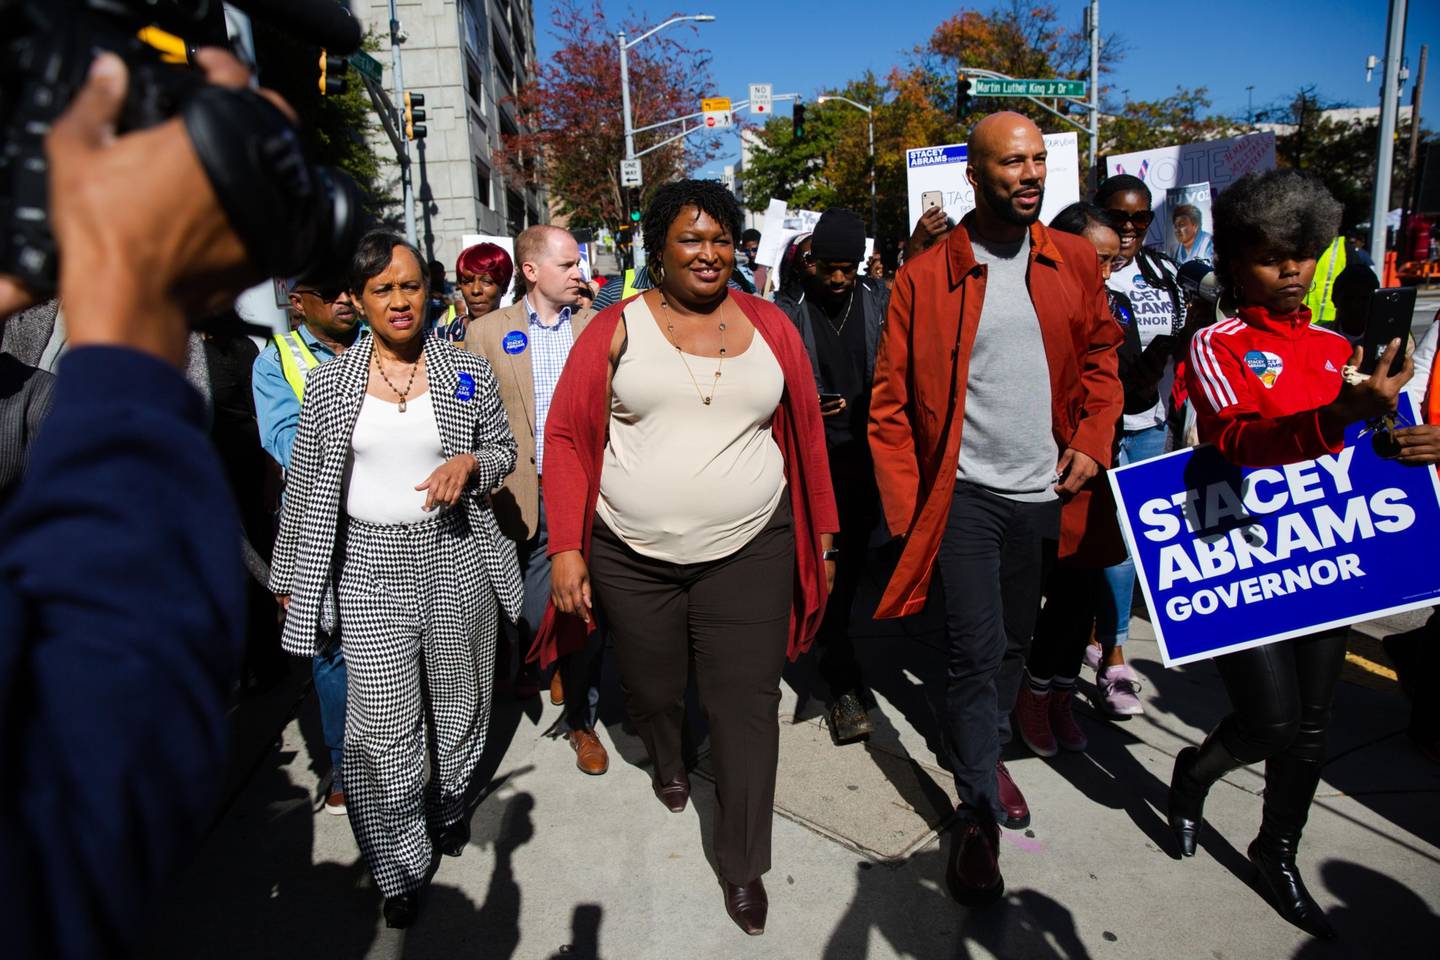 Stacey Abrams, Democratic nominee for governor of Georgia, and musical artist Common get out the vote on the streets of Atlanta. Bloomberg